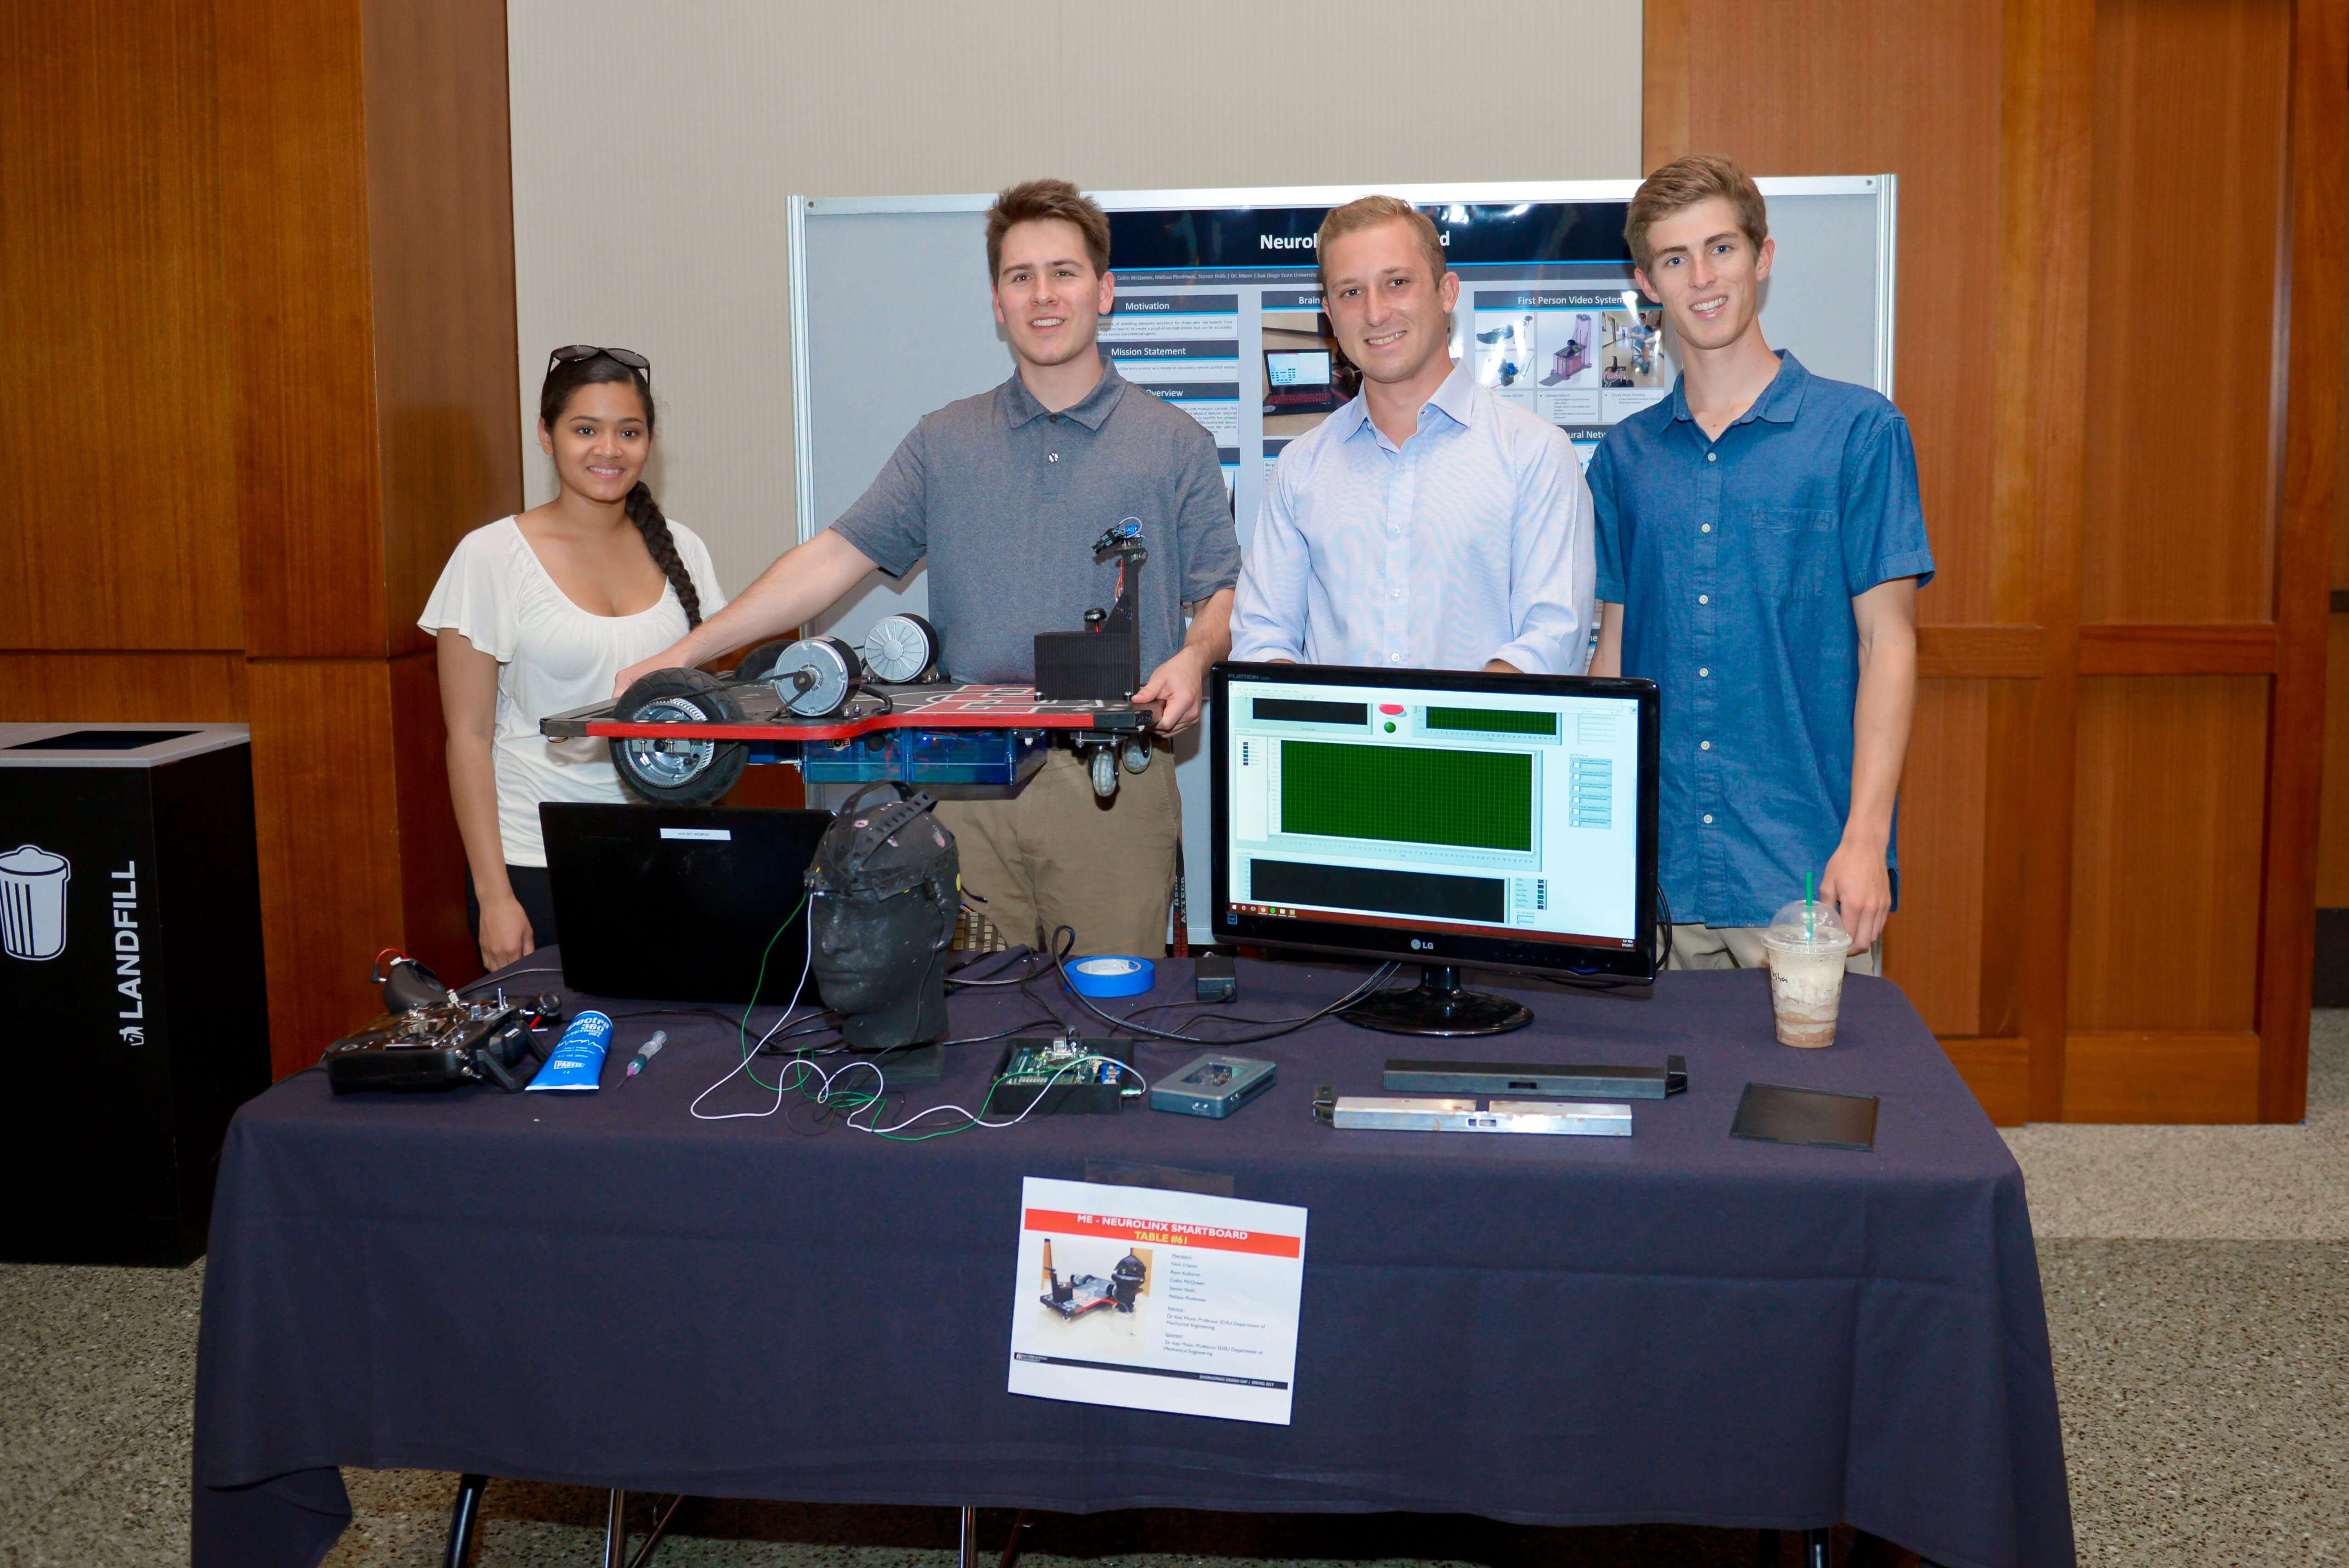 Four students displaying their computer and project.